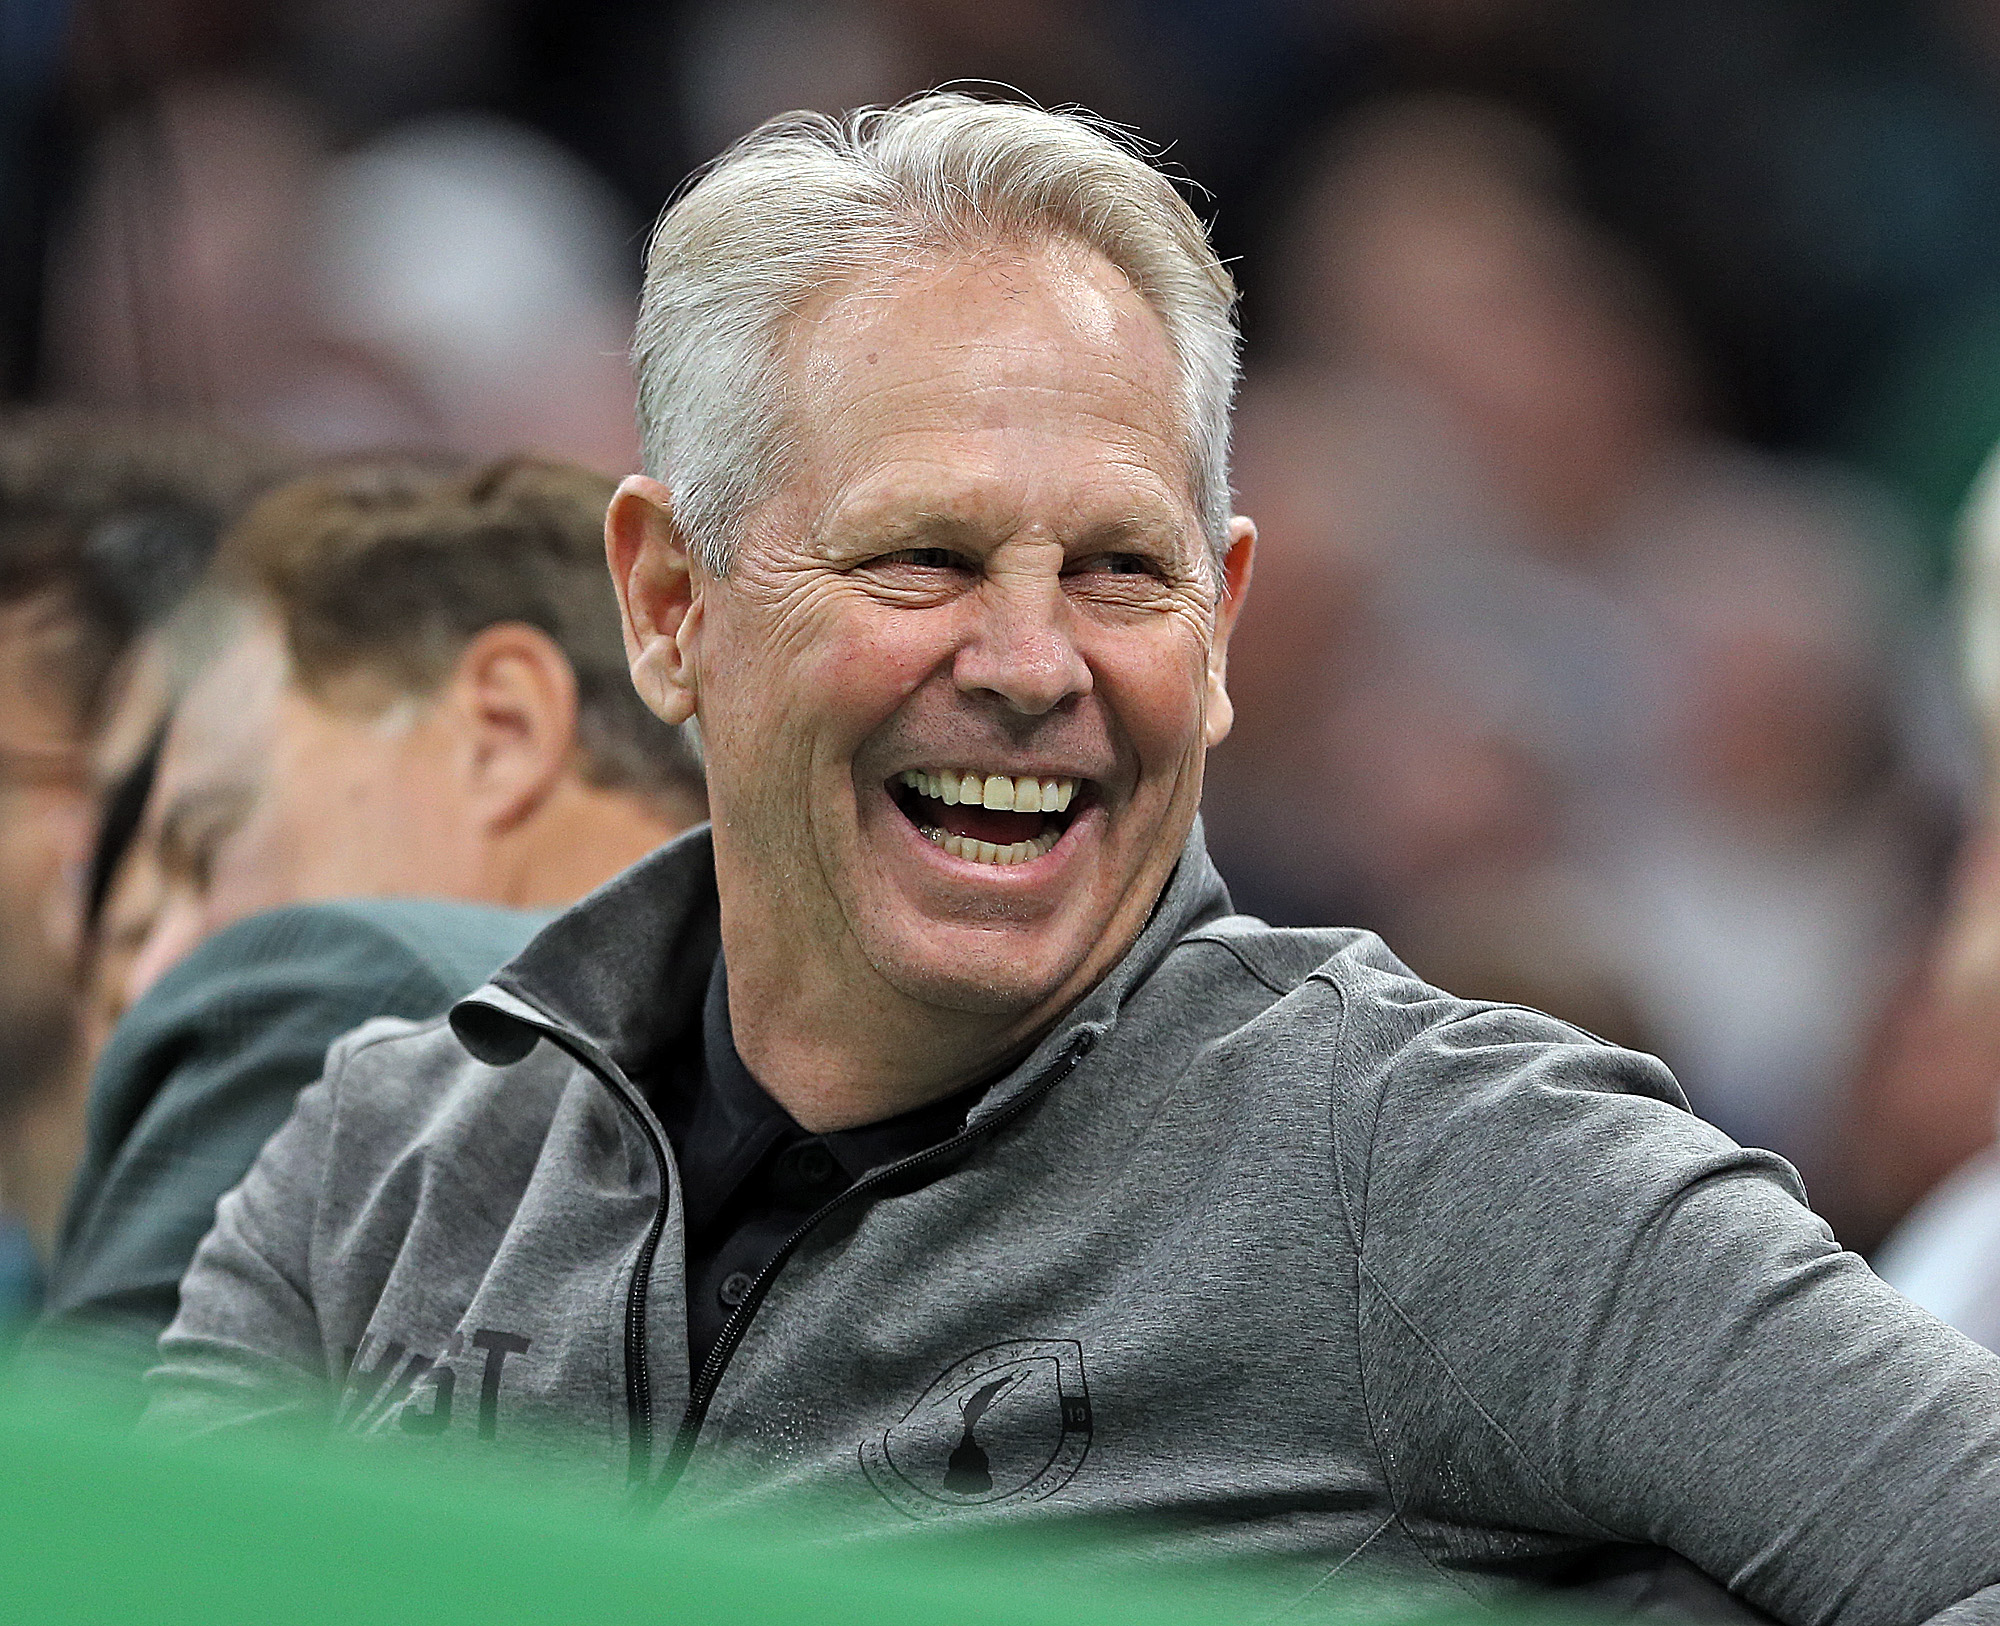 Danny Ainge, former GM of the Boston Celtics has a laugh during the first quarter of the NBA game against the LA Clippers.